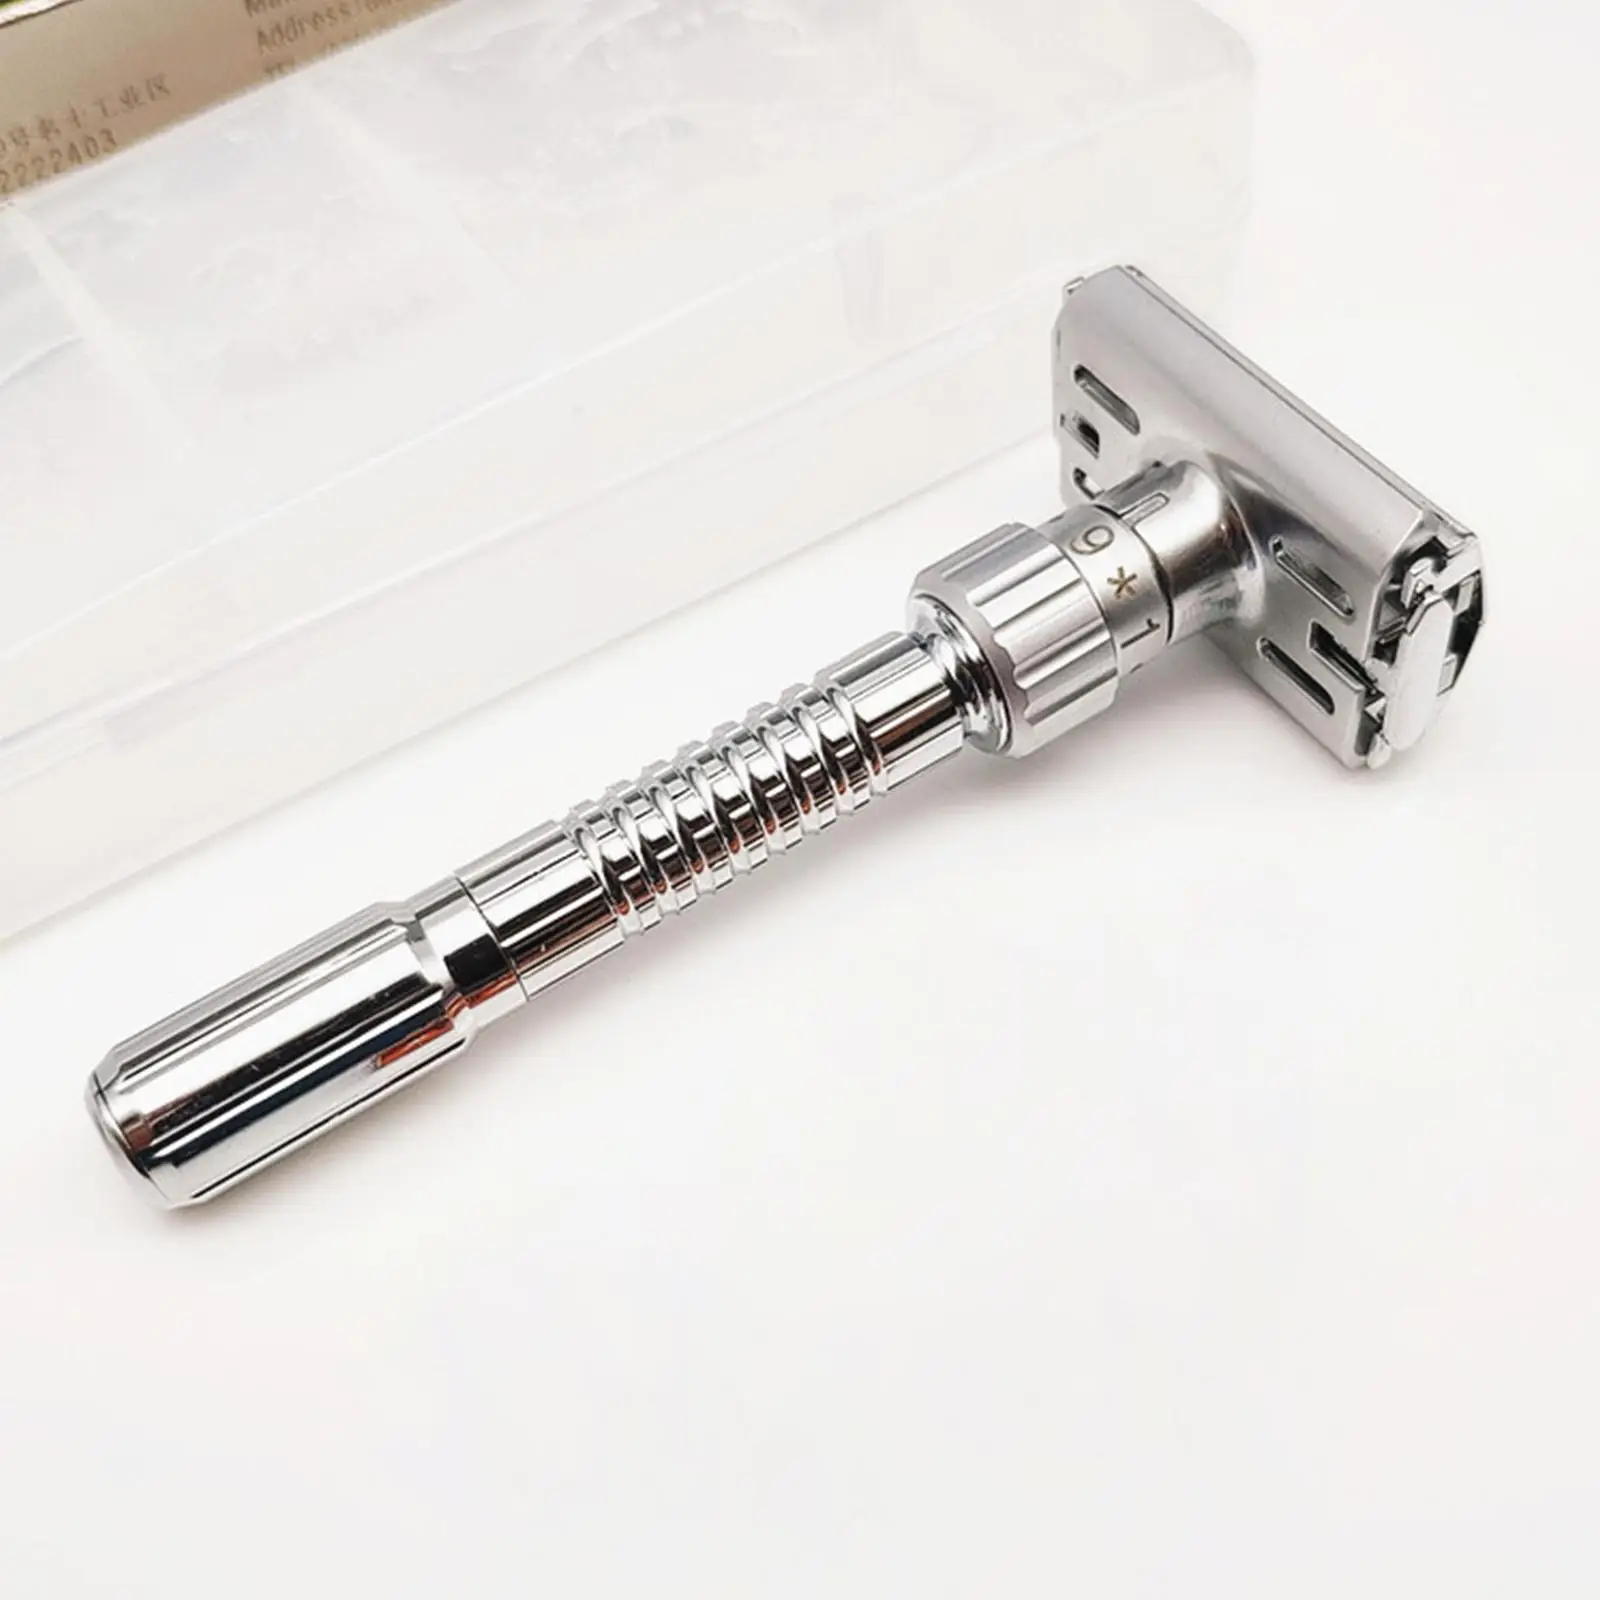 Manual Double Edge Safety Razor with 5 Blades Zinc Alloy Reusable Plated Adjustable Shaver Double Edge Razor for Everyday Use